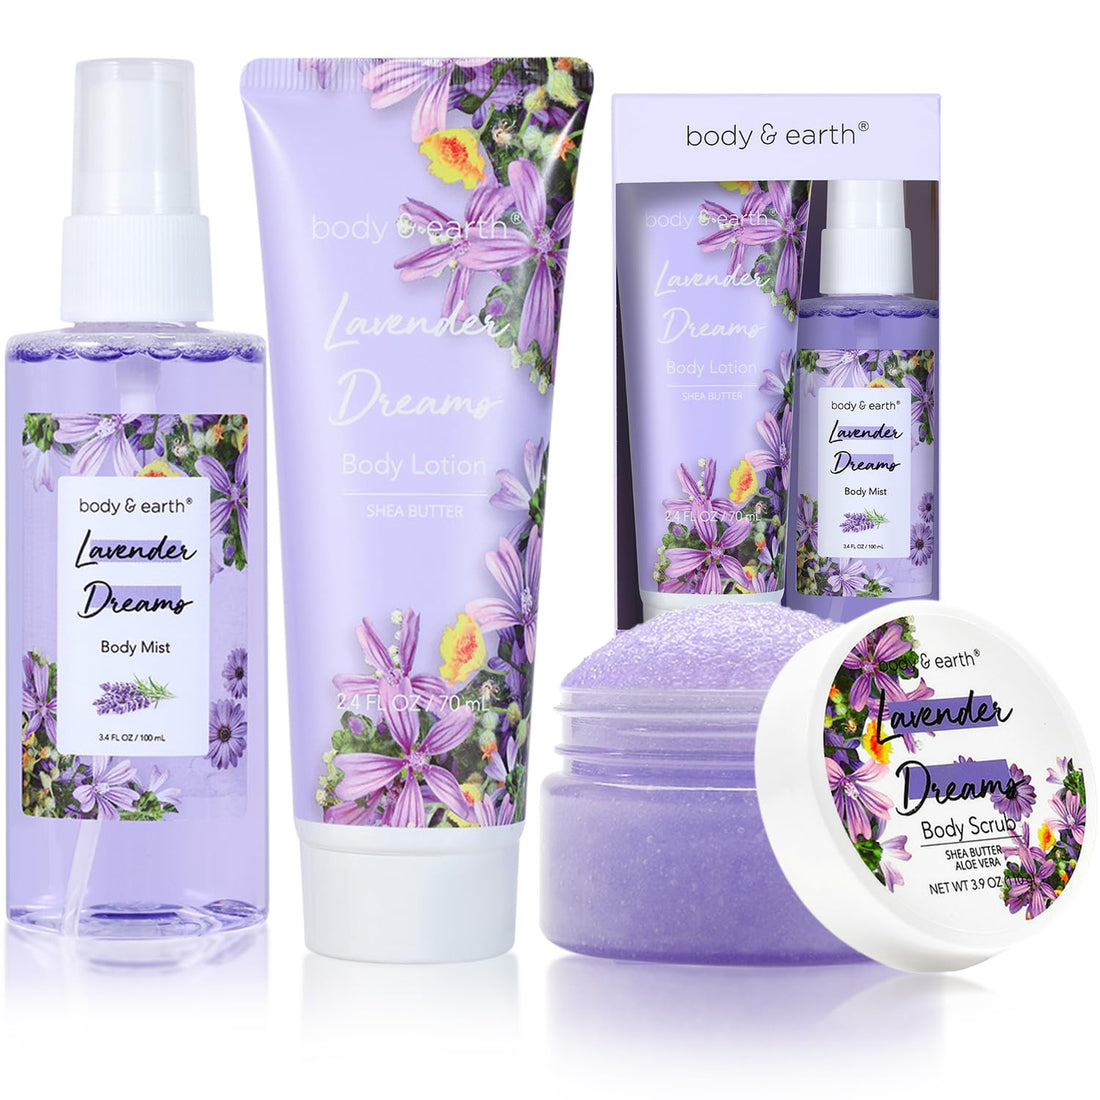 Body &amp; Earth Inc Body Spa Gift Sets for Women Gift with Perfumn Mist, Body Lotion, and Body Scrub